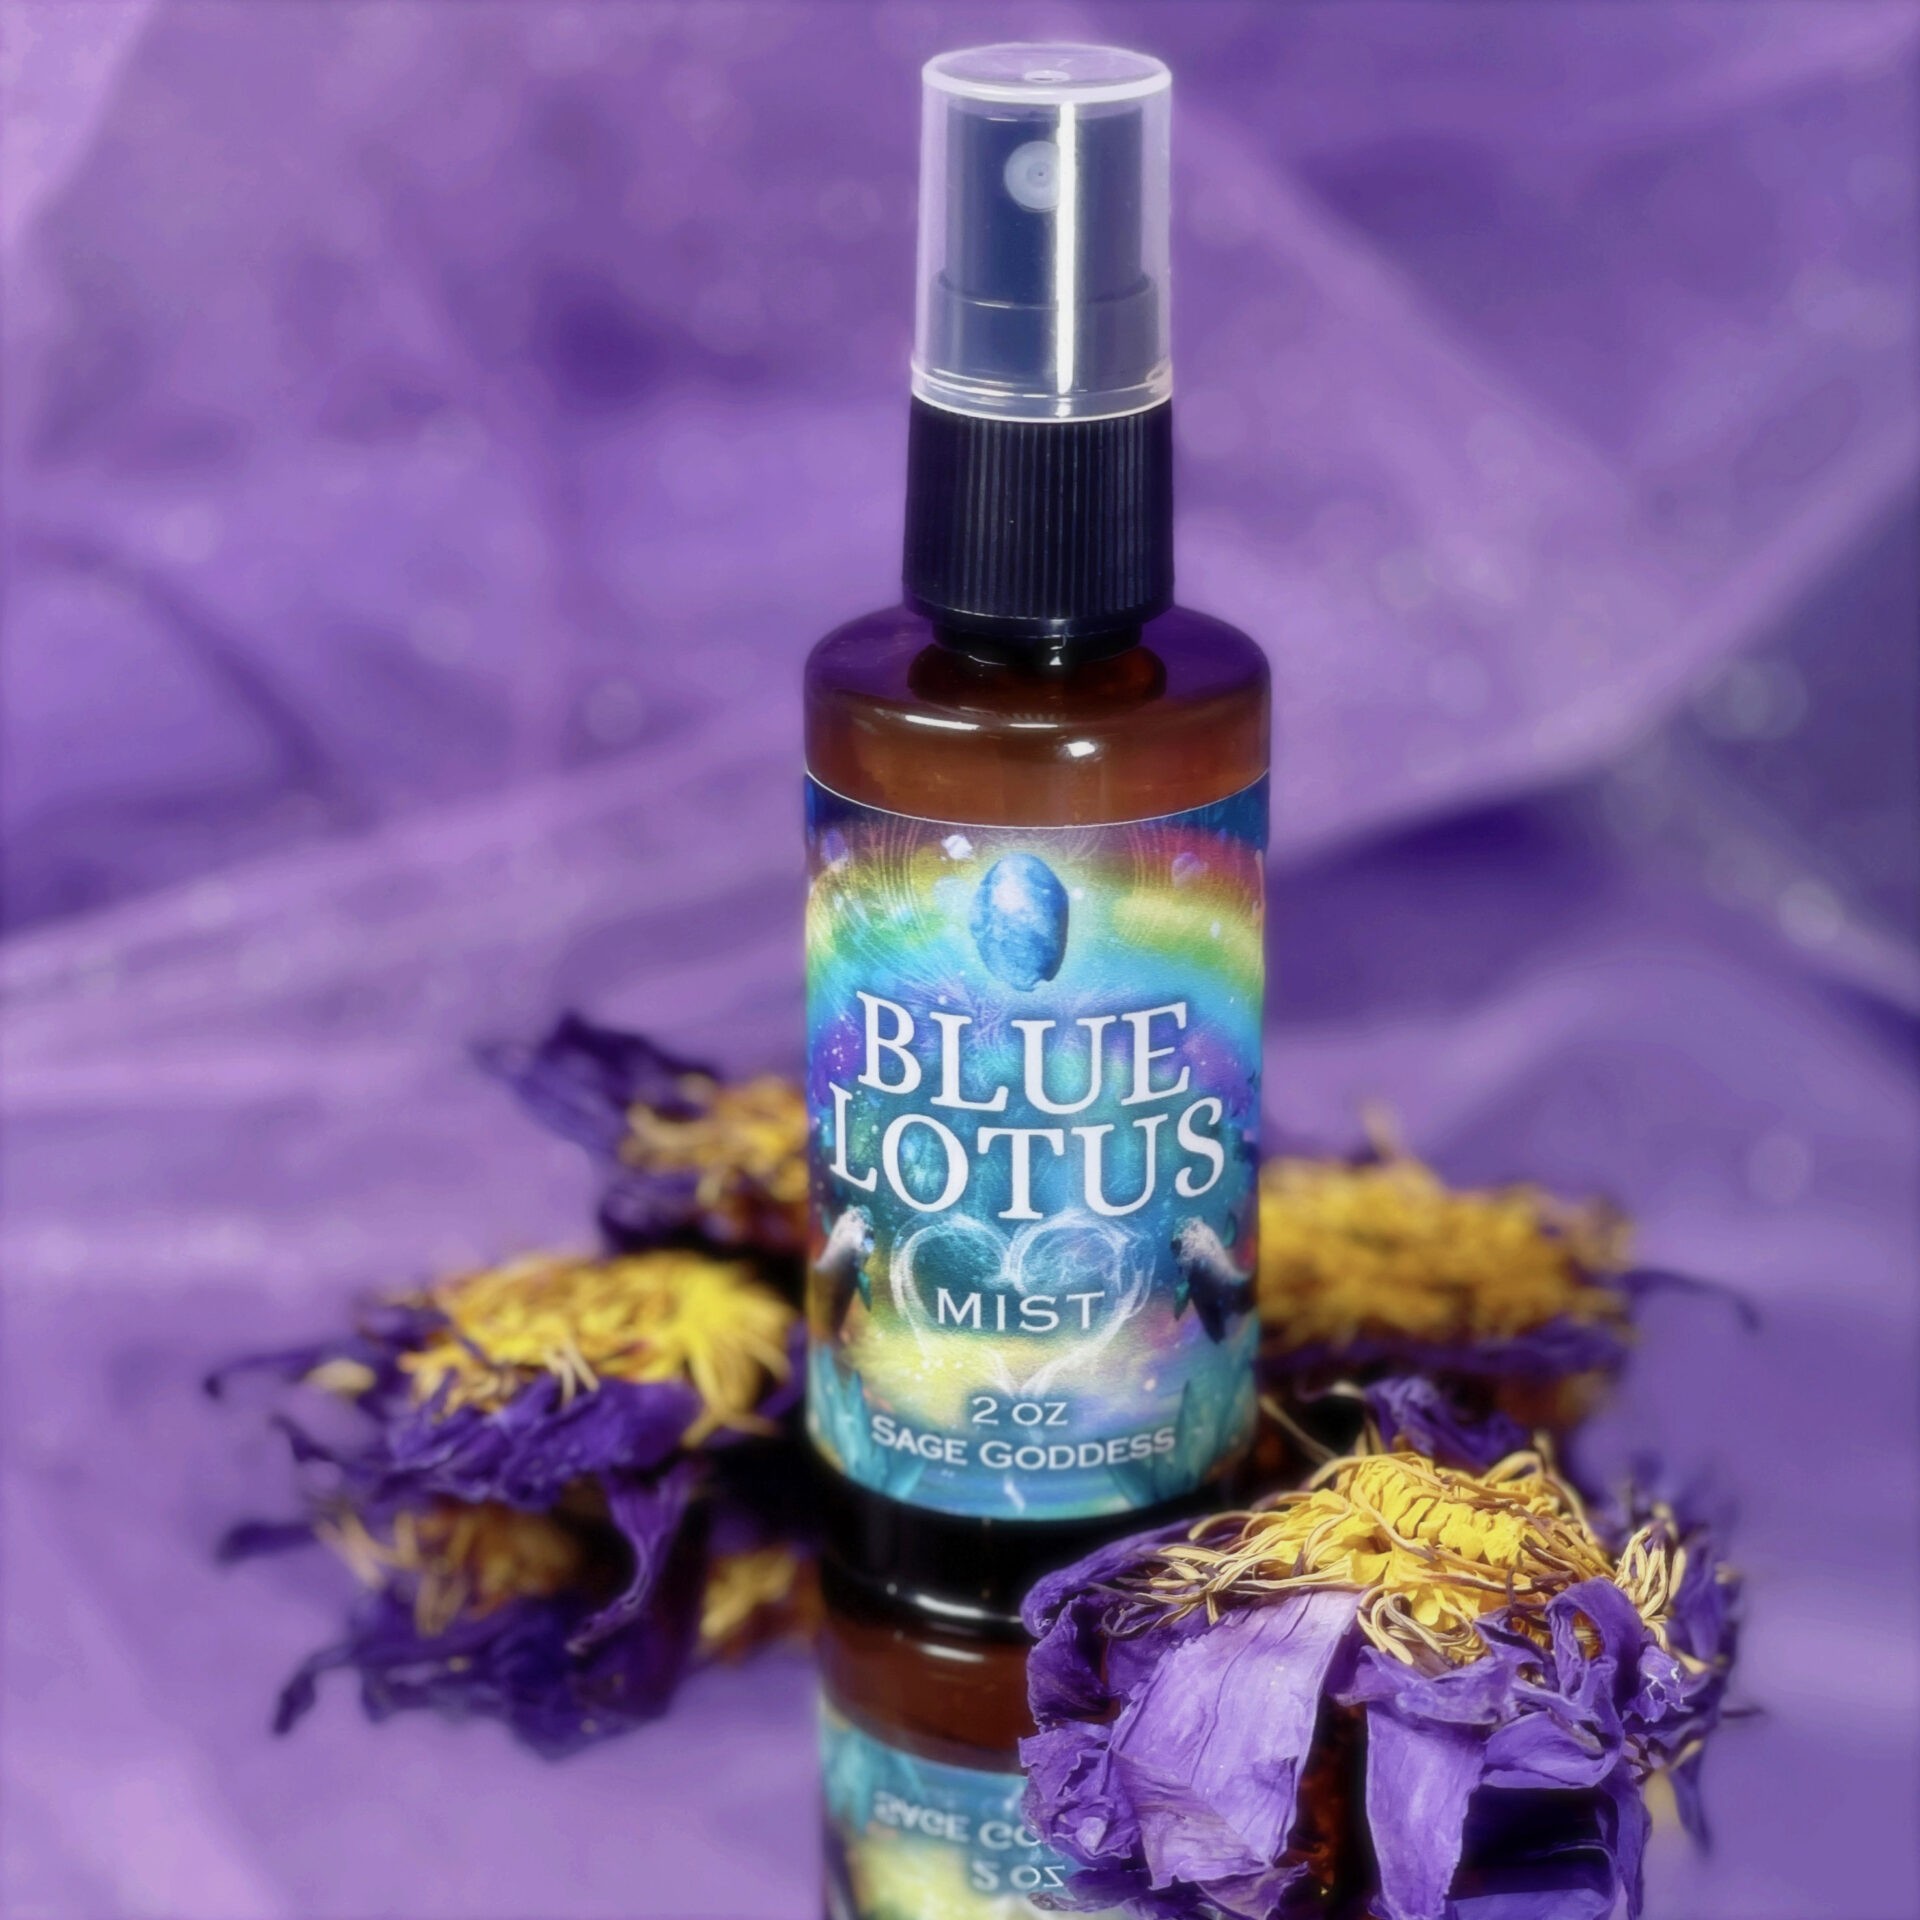 Northern Lights Mystic Moon Fragrance Oil For Candle Making 2 Oz. Opened  Full